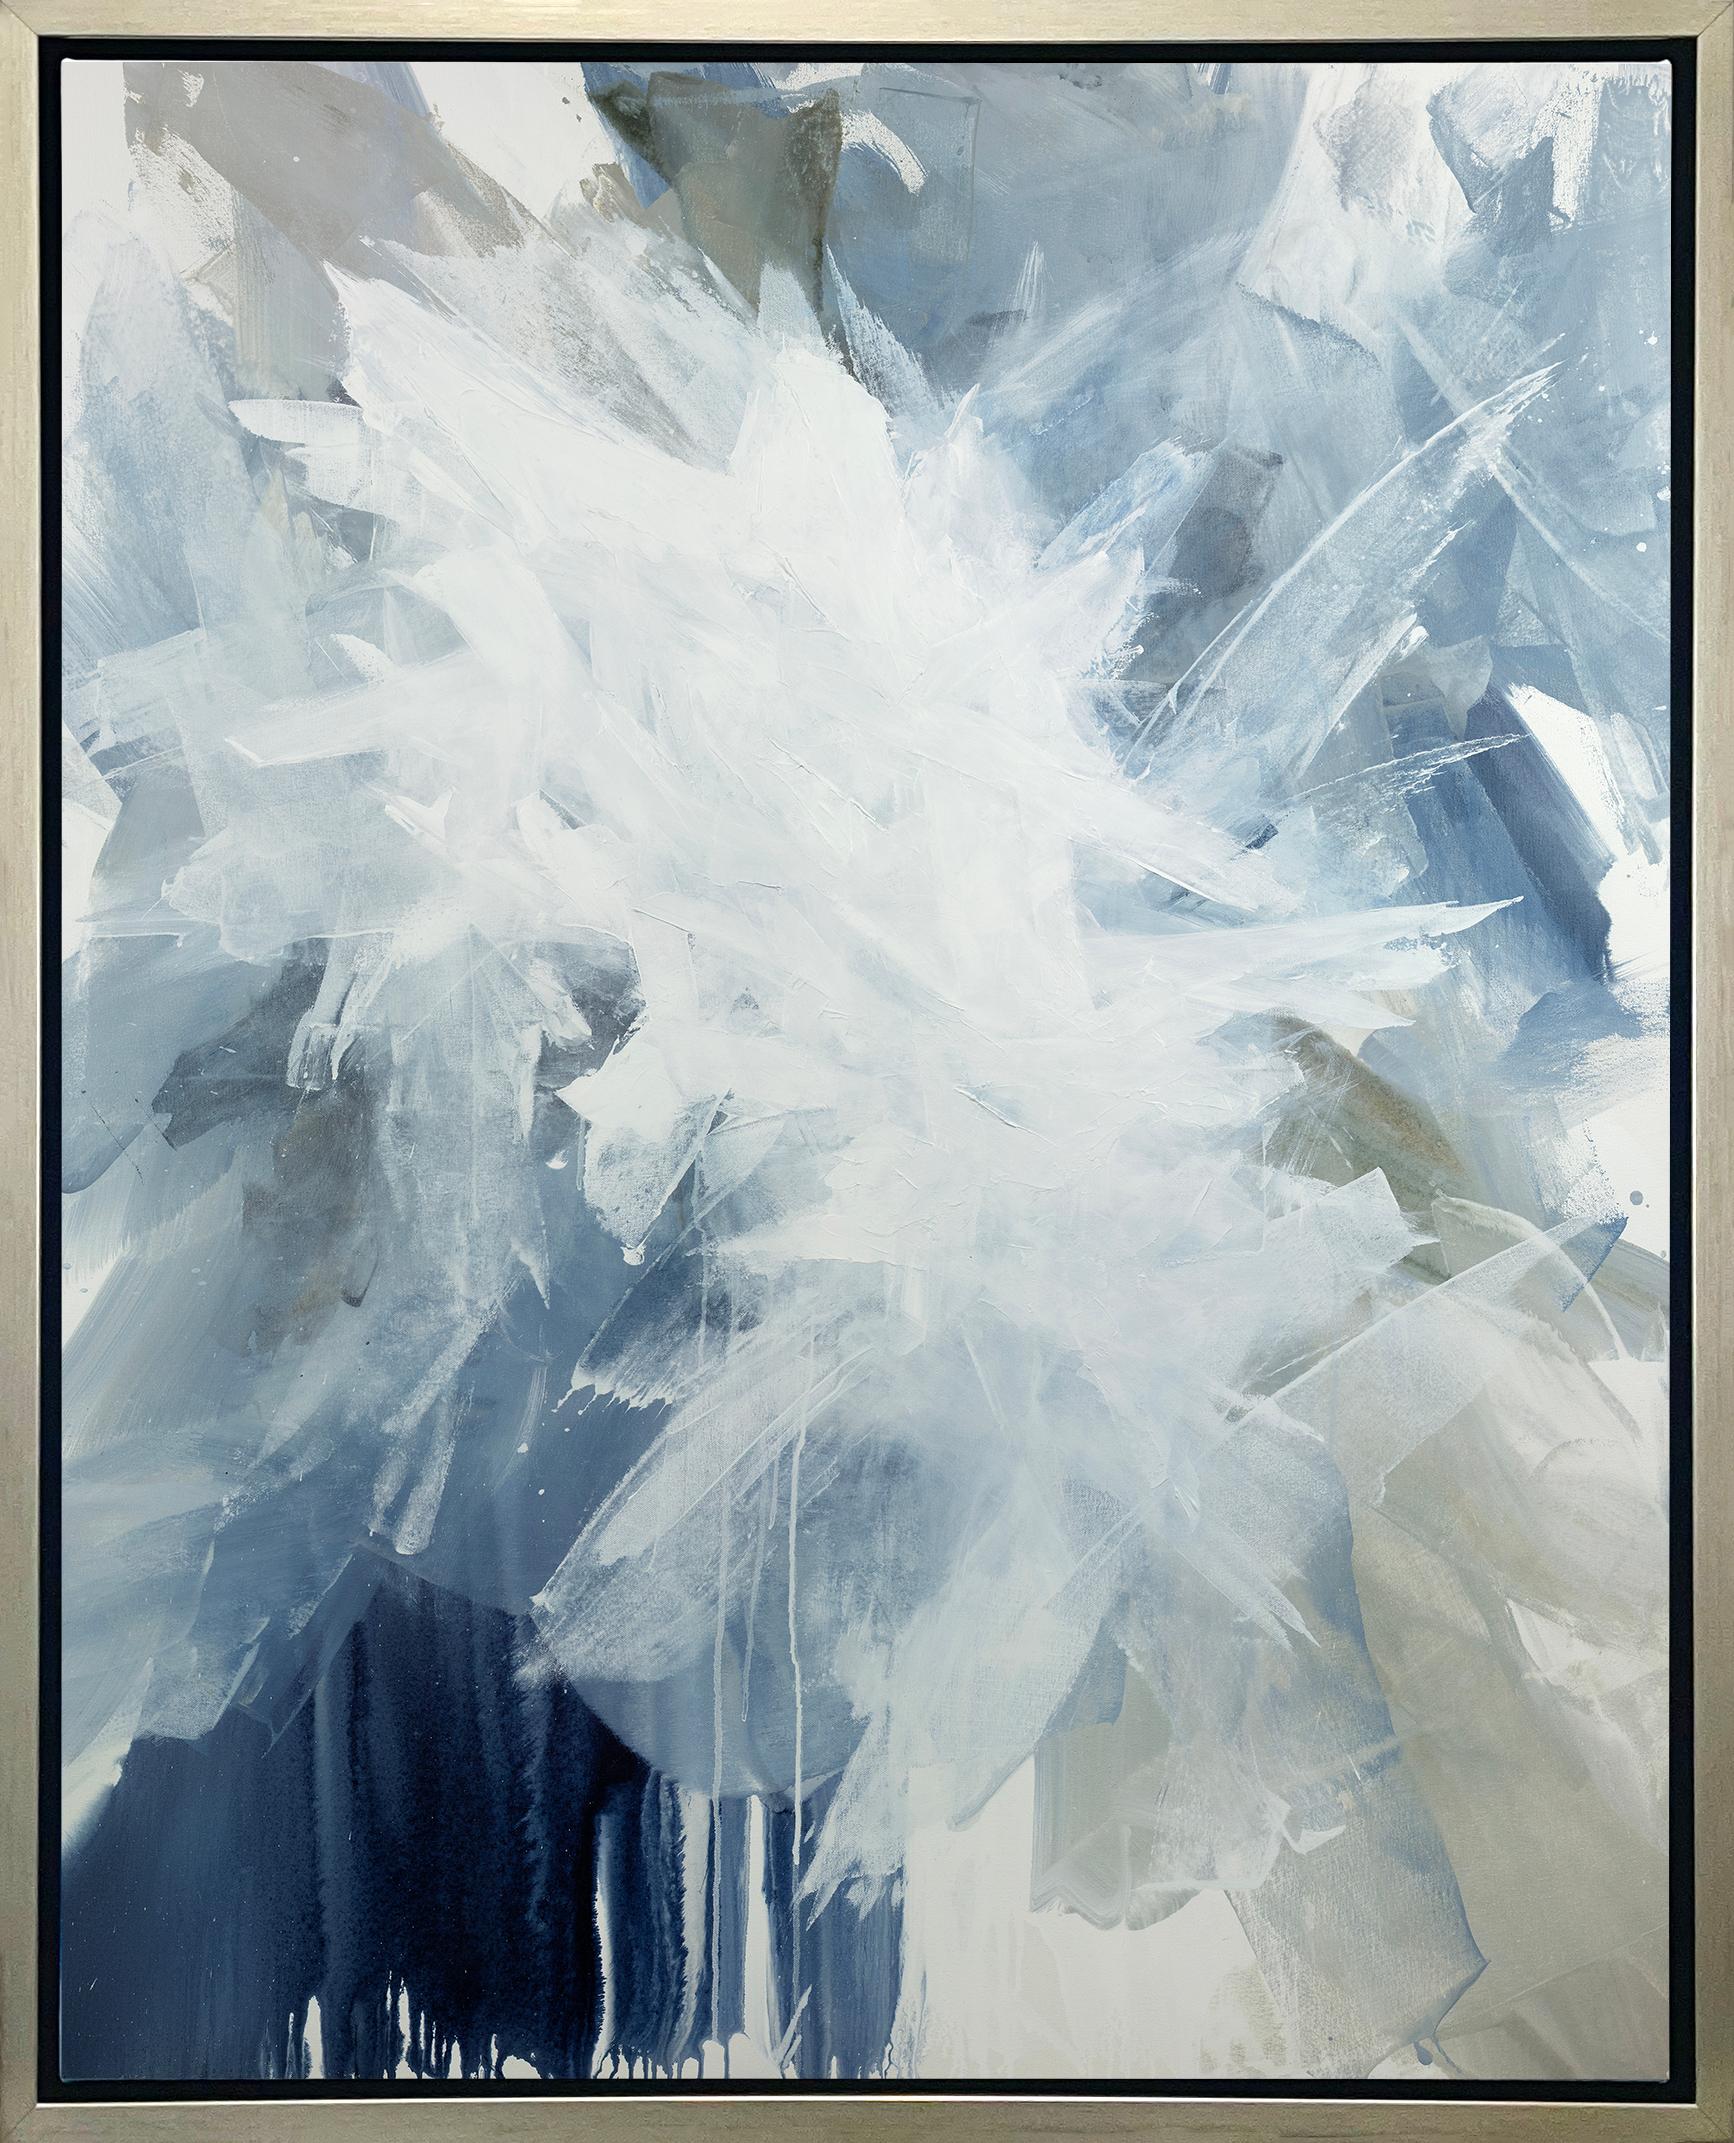 Teodora Guererra Abstract Print - "White Dove, " Framed Limited Edition Giclee Print, 20" x 16"